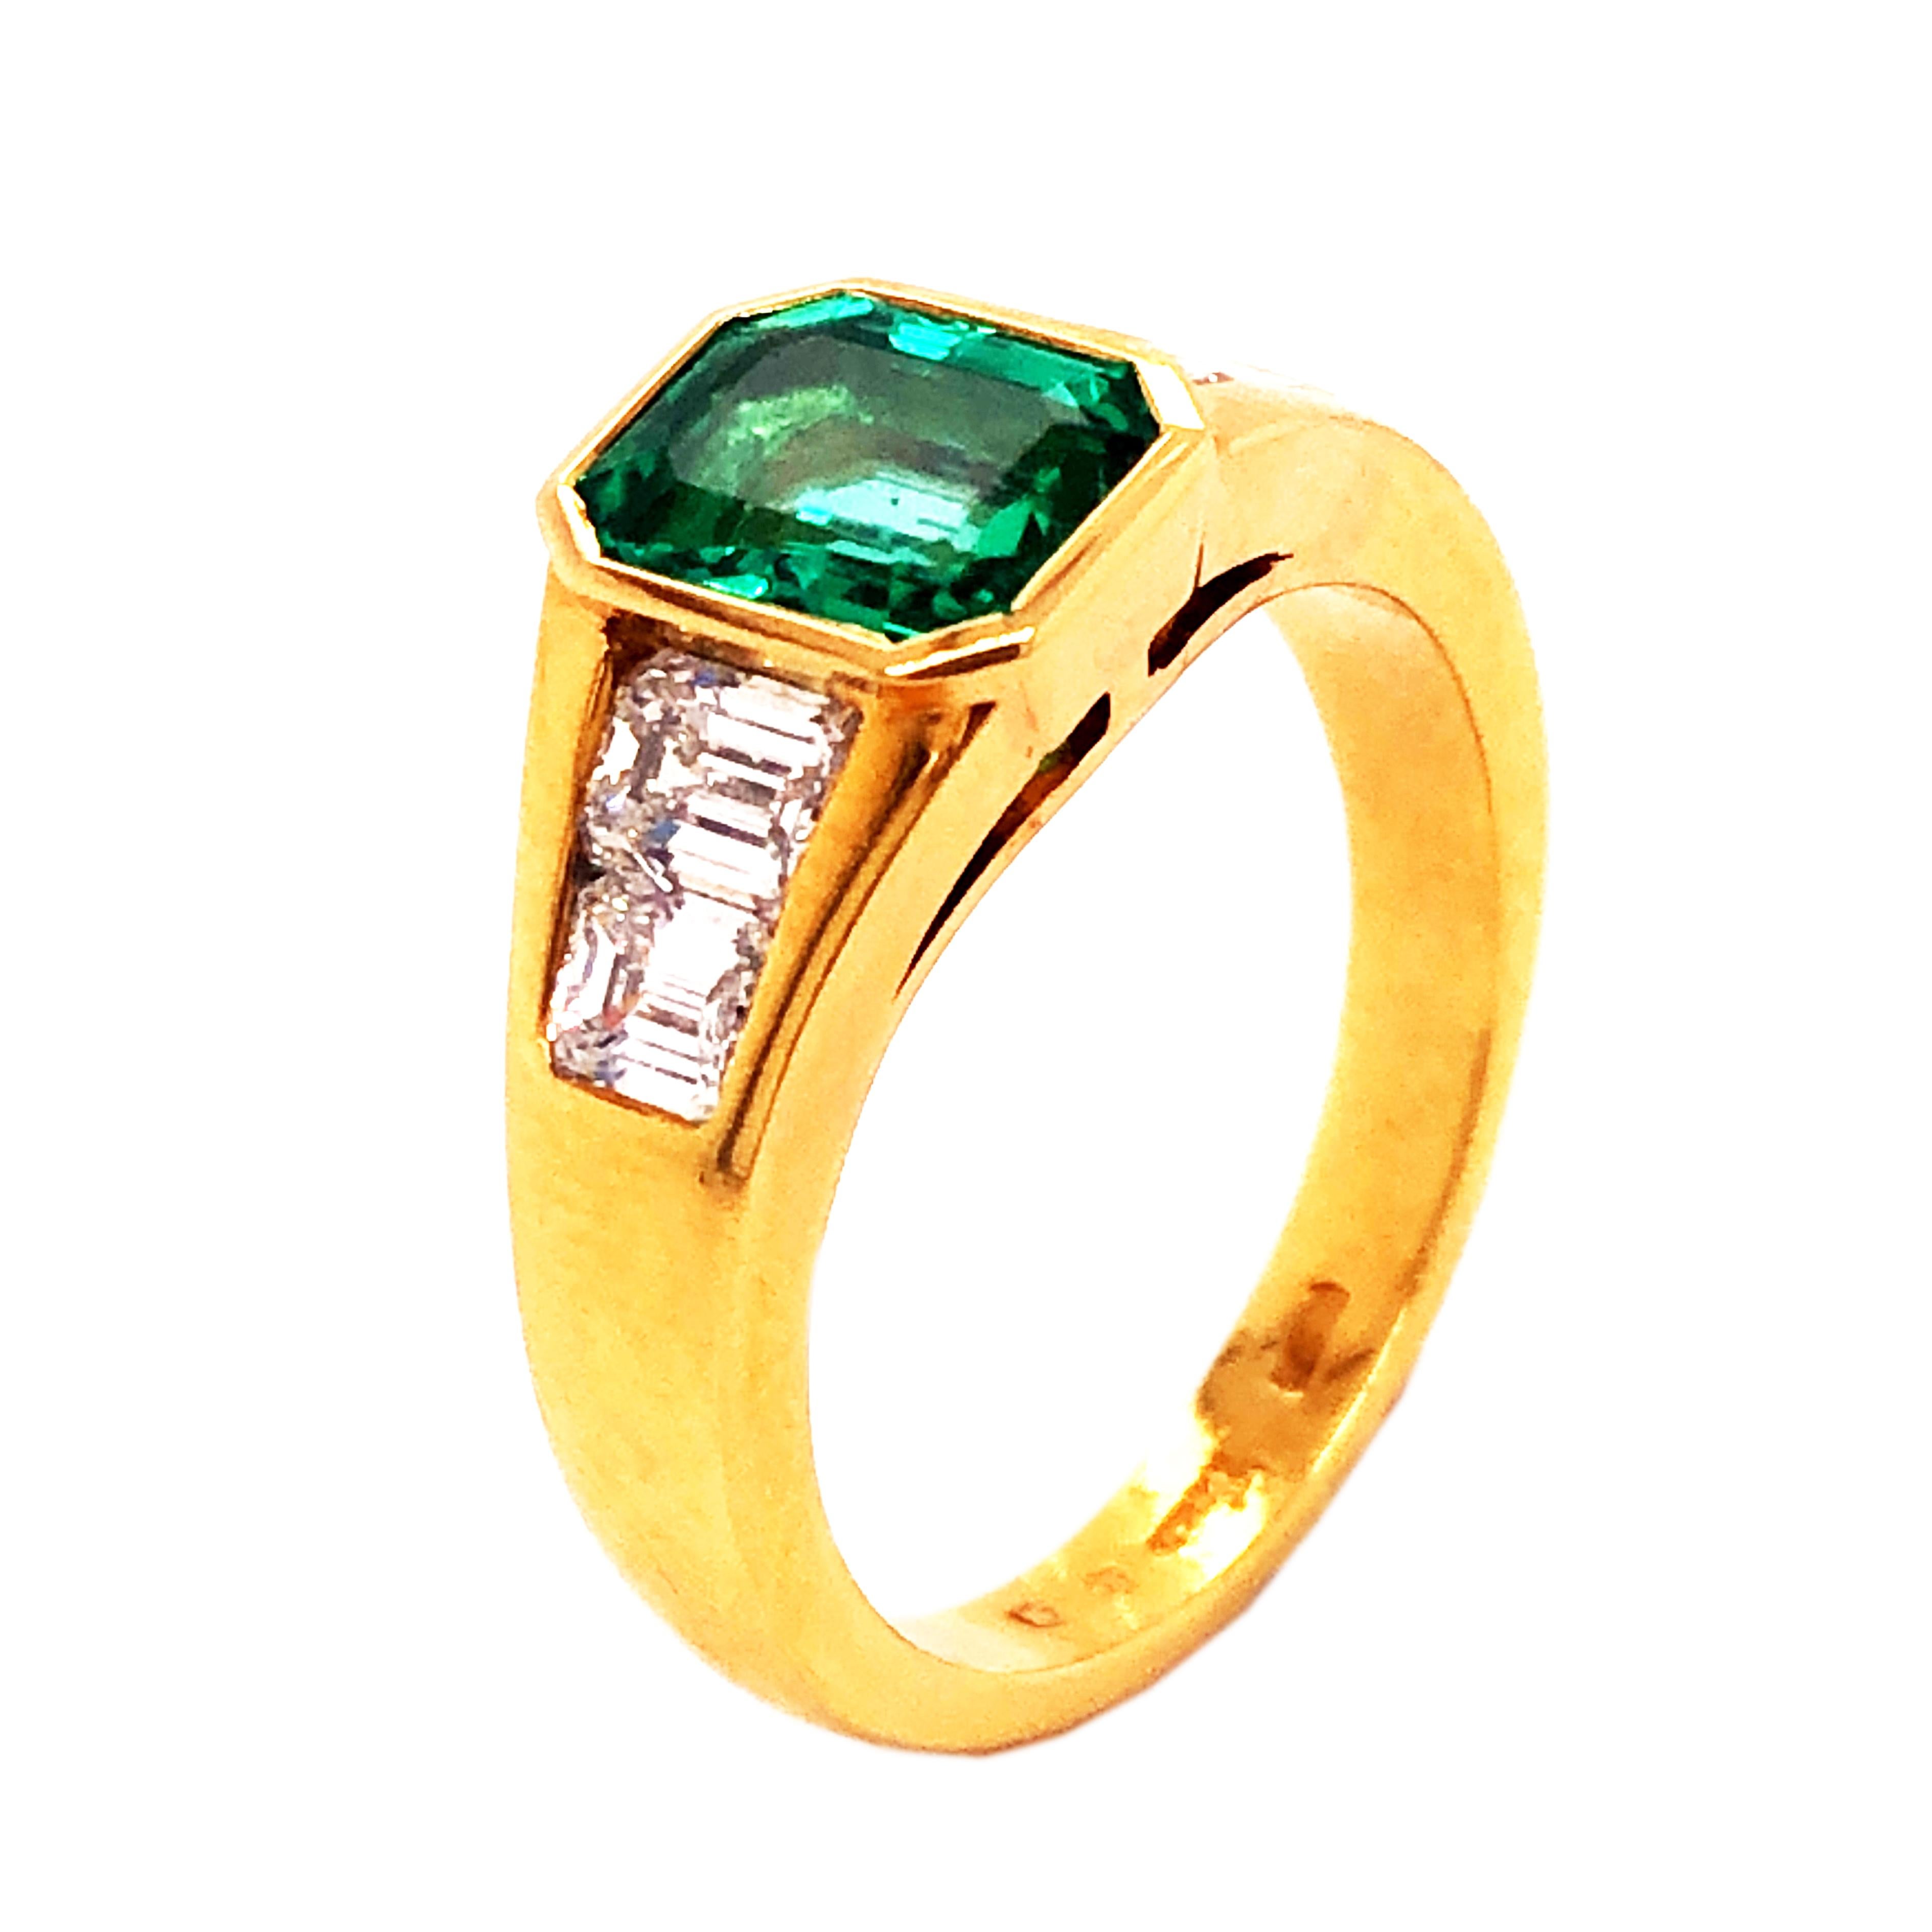 Outstanding, 1.51 Carat Muzo Emerald Cut Minor Oil, in a fabulous, handcrafted 1.01 Carat Top Quality White Diamond (D, IF) 18K yellow Gold Ring Setting.
In our fitted brown leather case.
Detailed gemmological certificate included.
US Size 6 1/2,